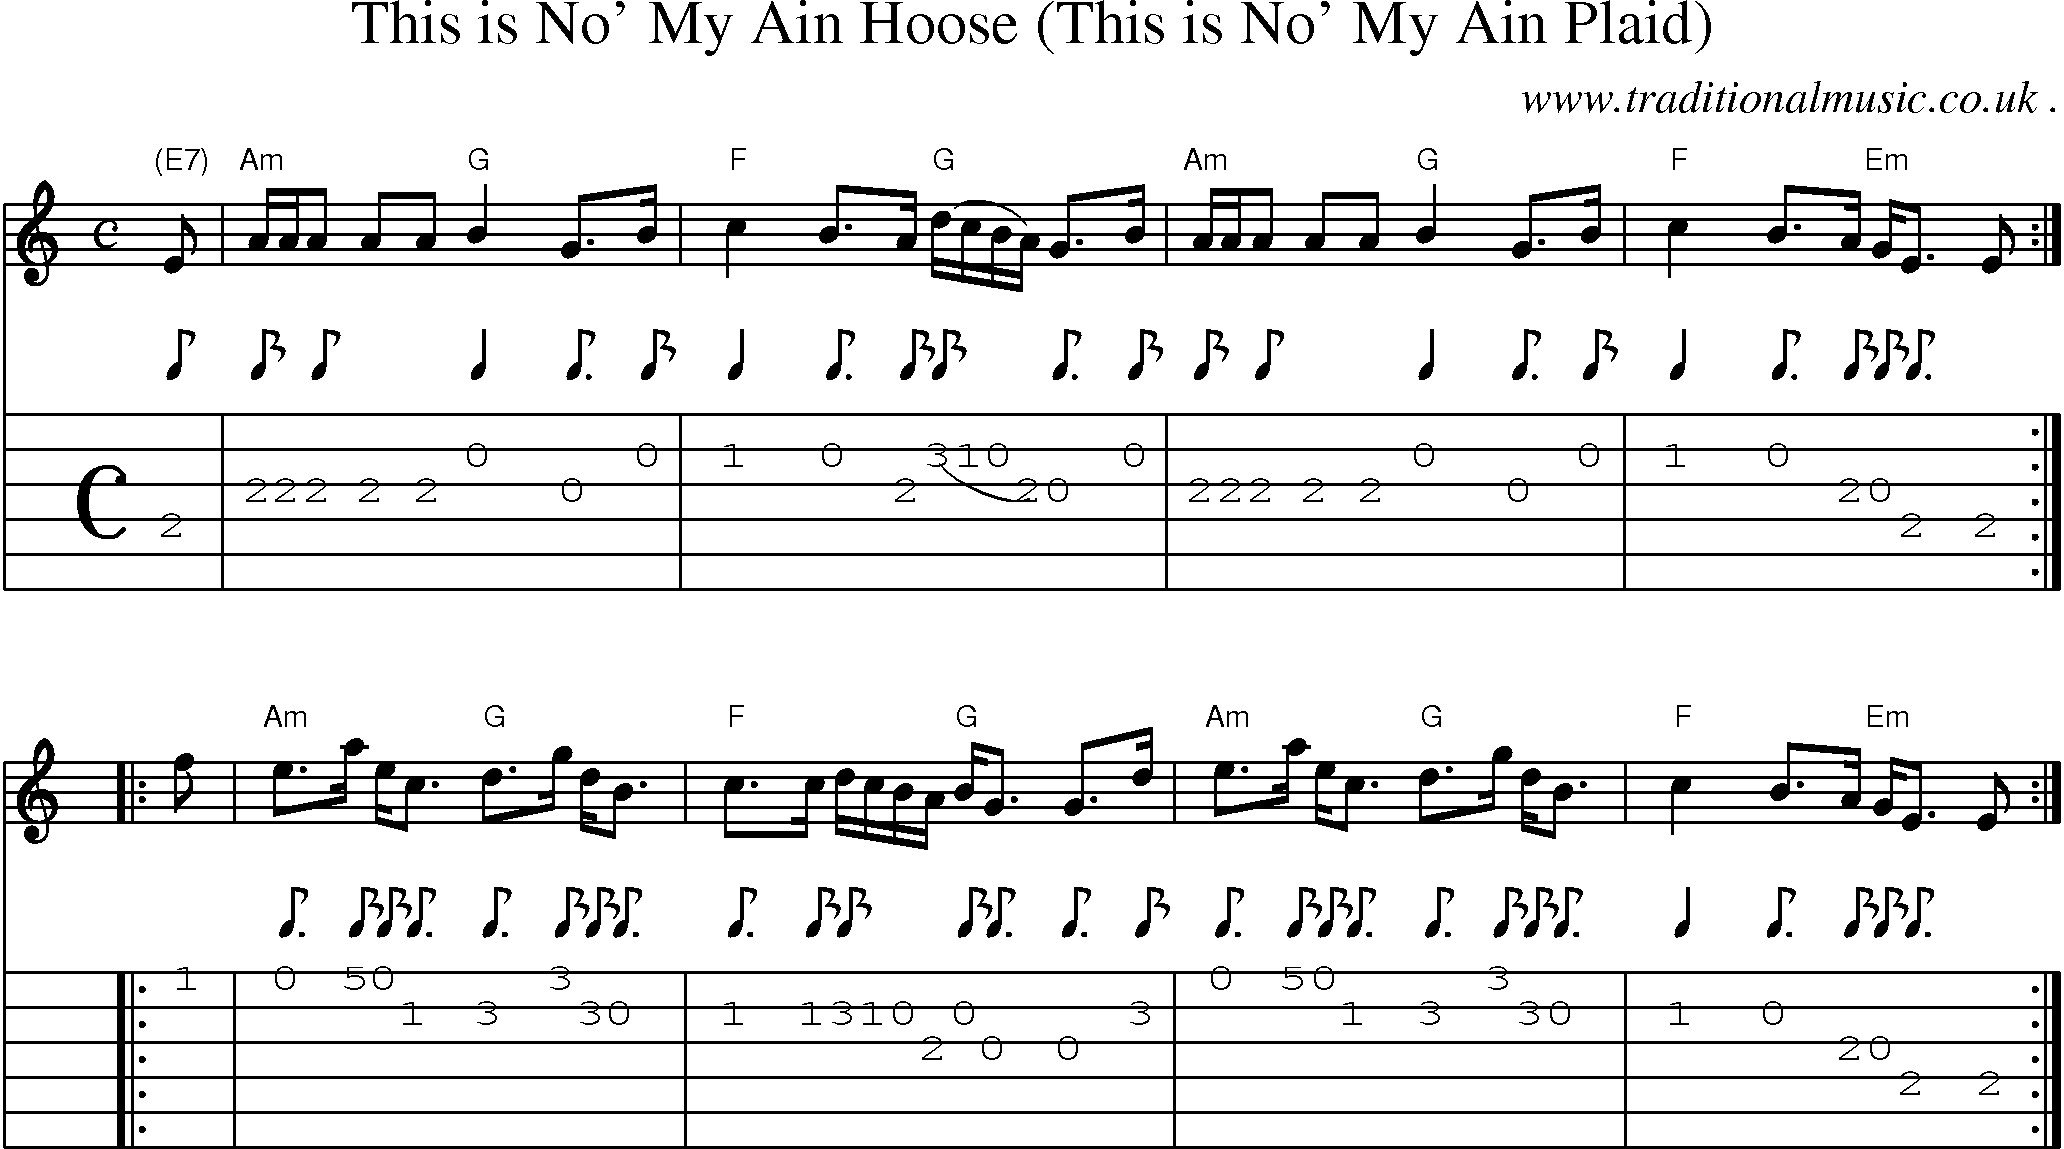 Sheet-music  score, Chords and Guitar Tabs for This Is No My Ain Hoose This Is No My Ain Plaid